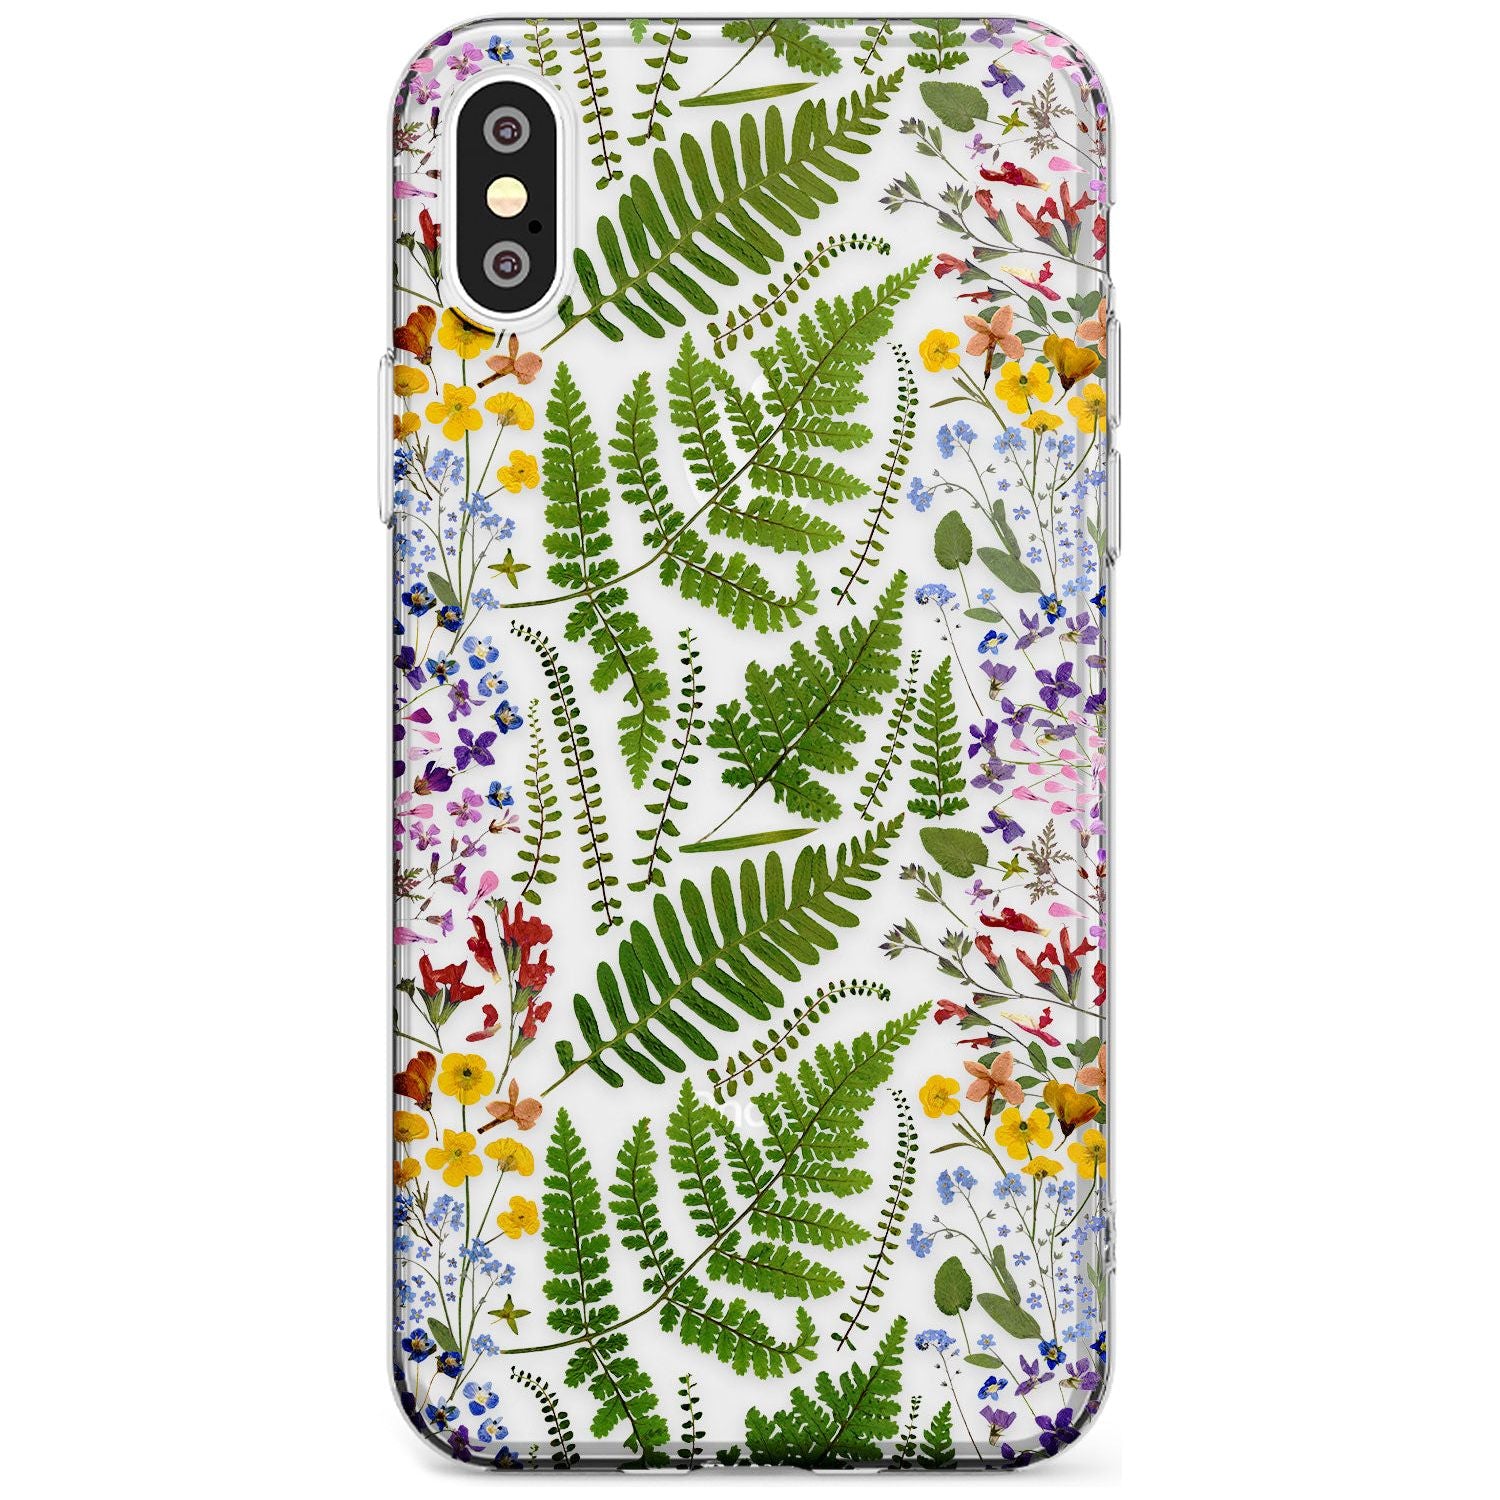 Busy Floral and Fern Design Slim TPU Phone Case Warehouse X XS Max XR